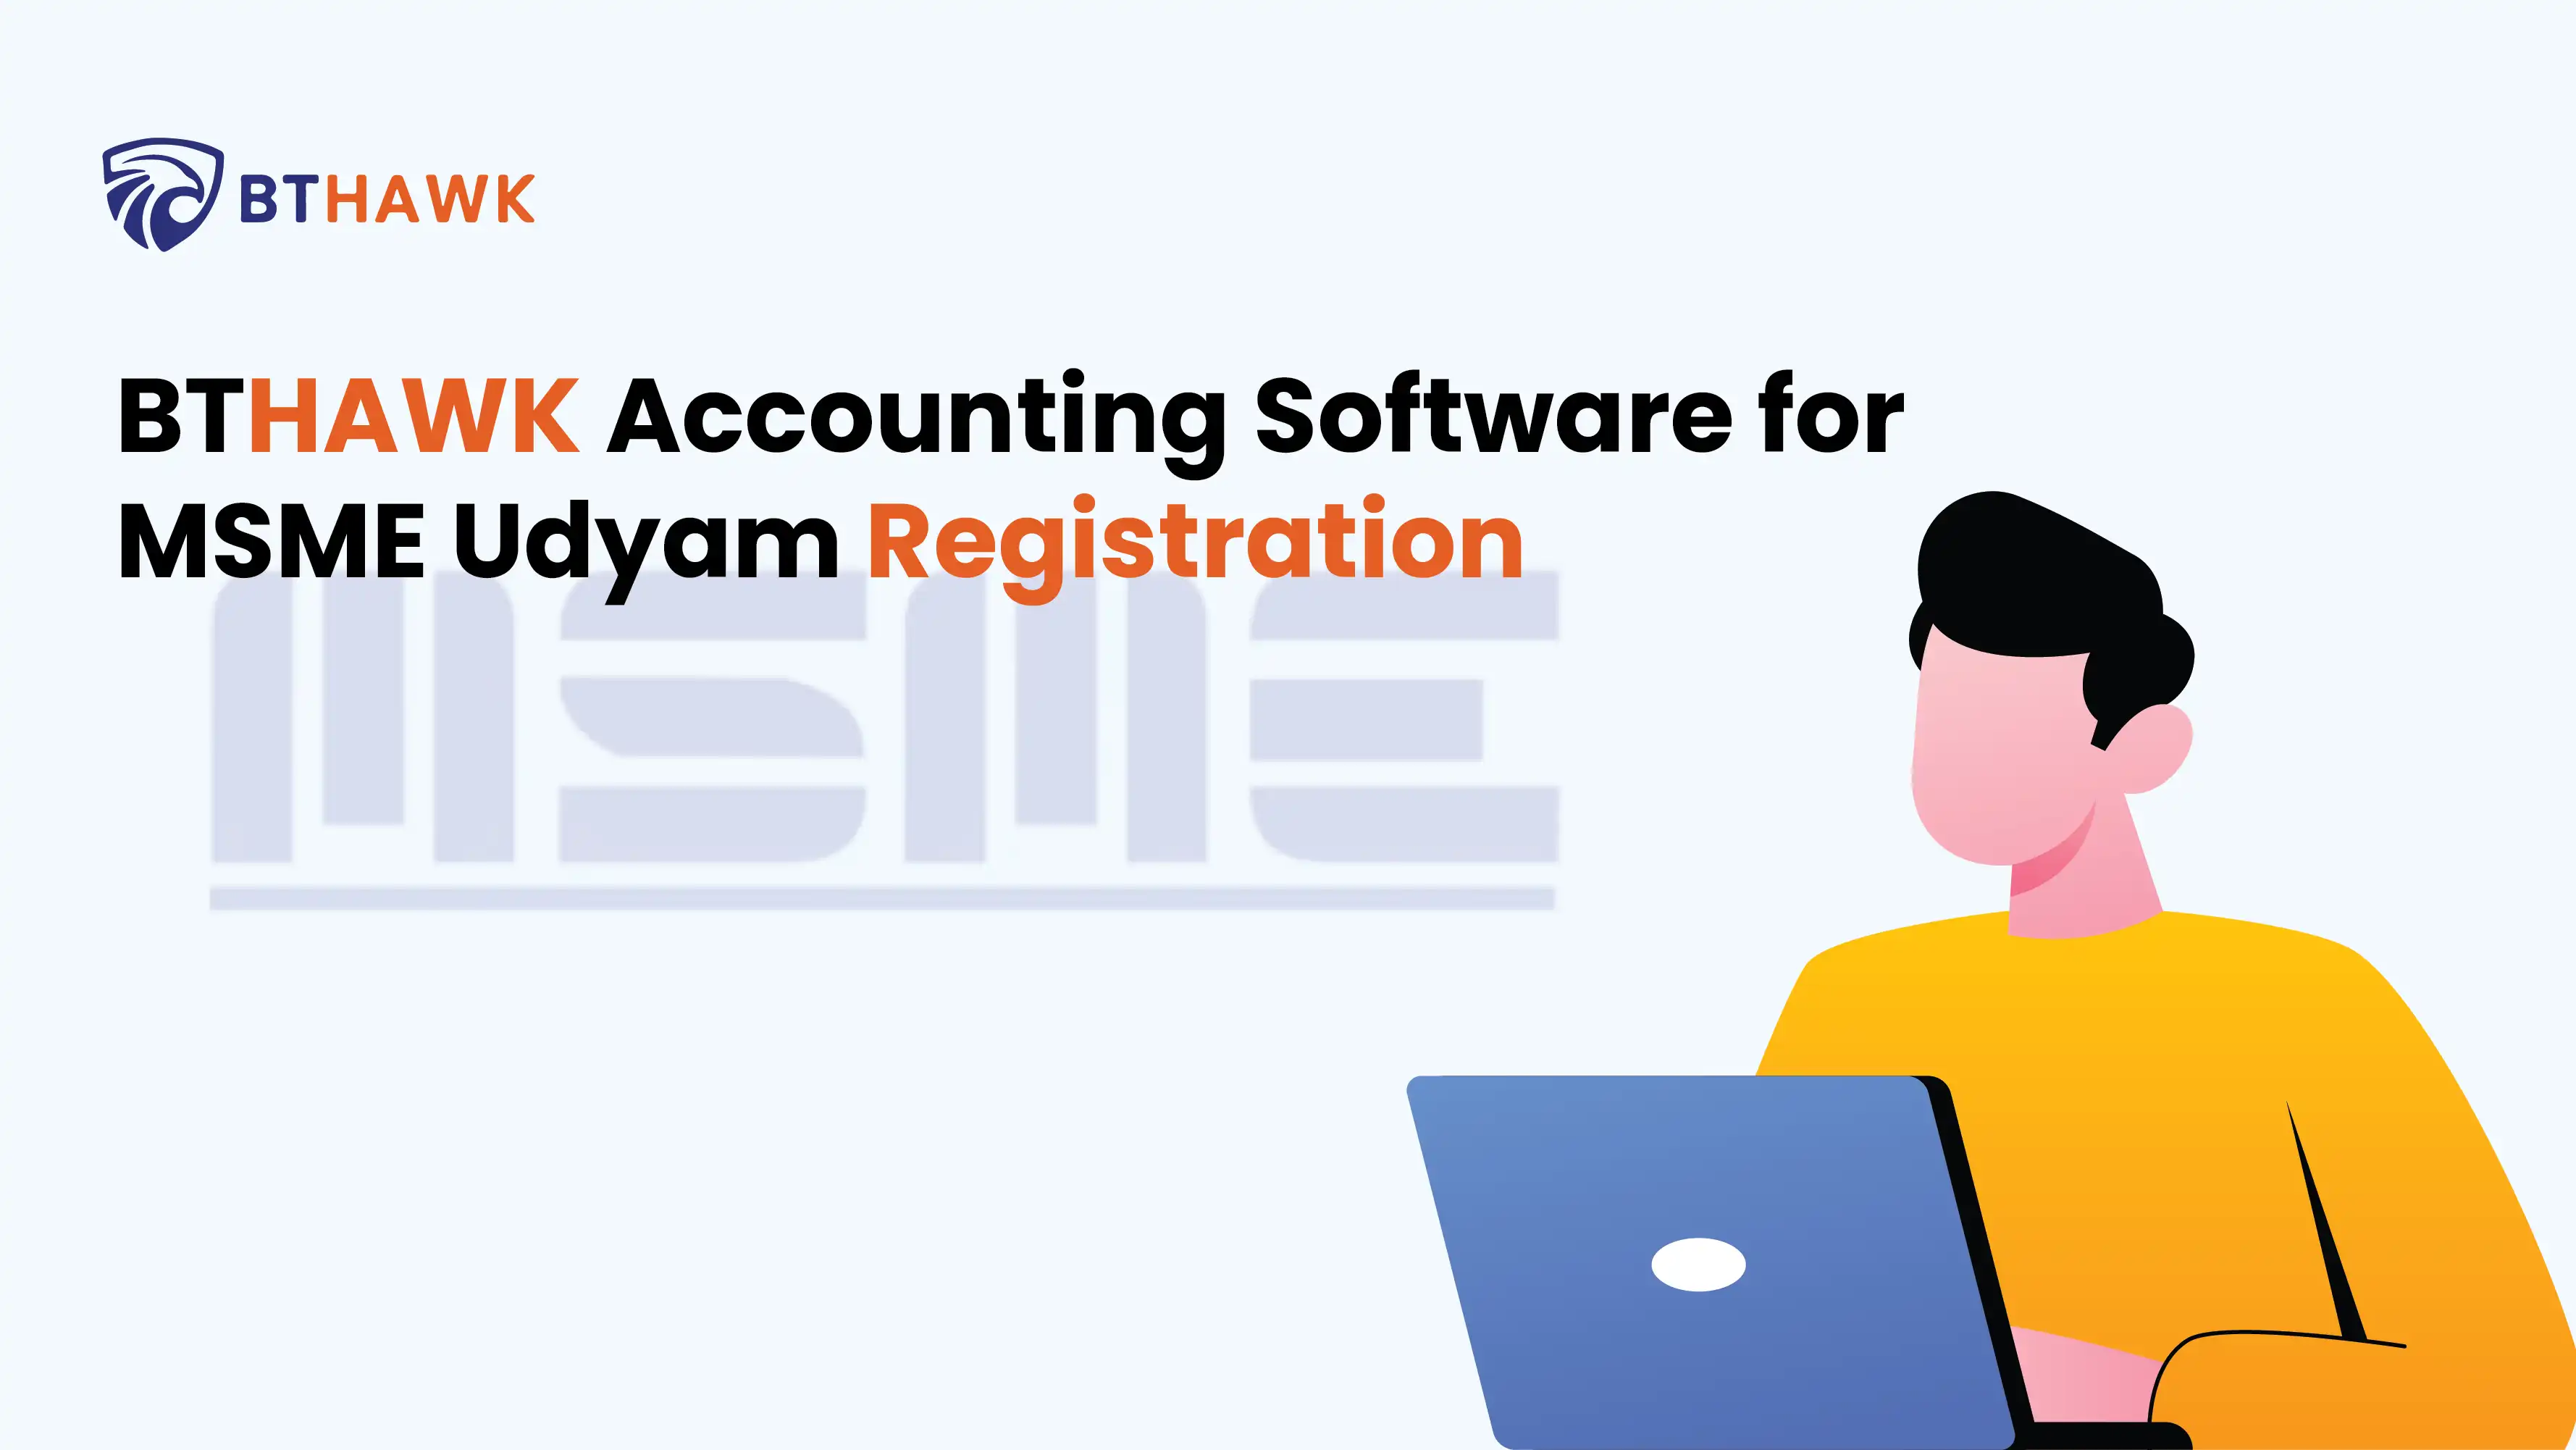 Accounting Software for MSME registrations